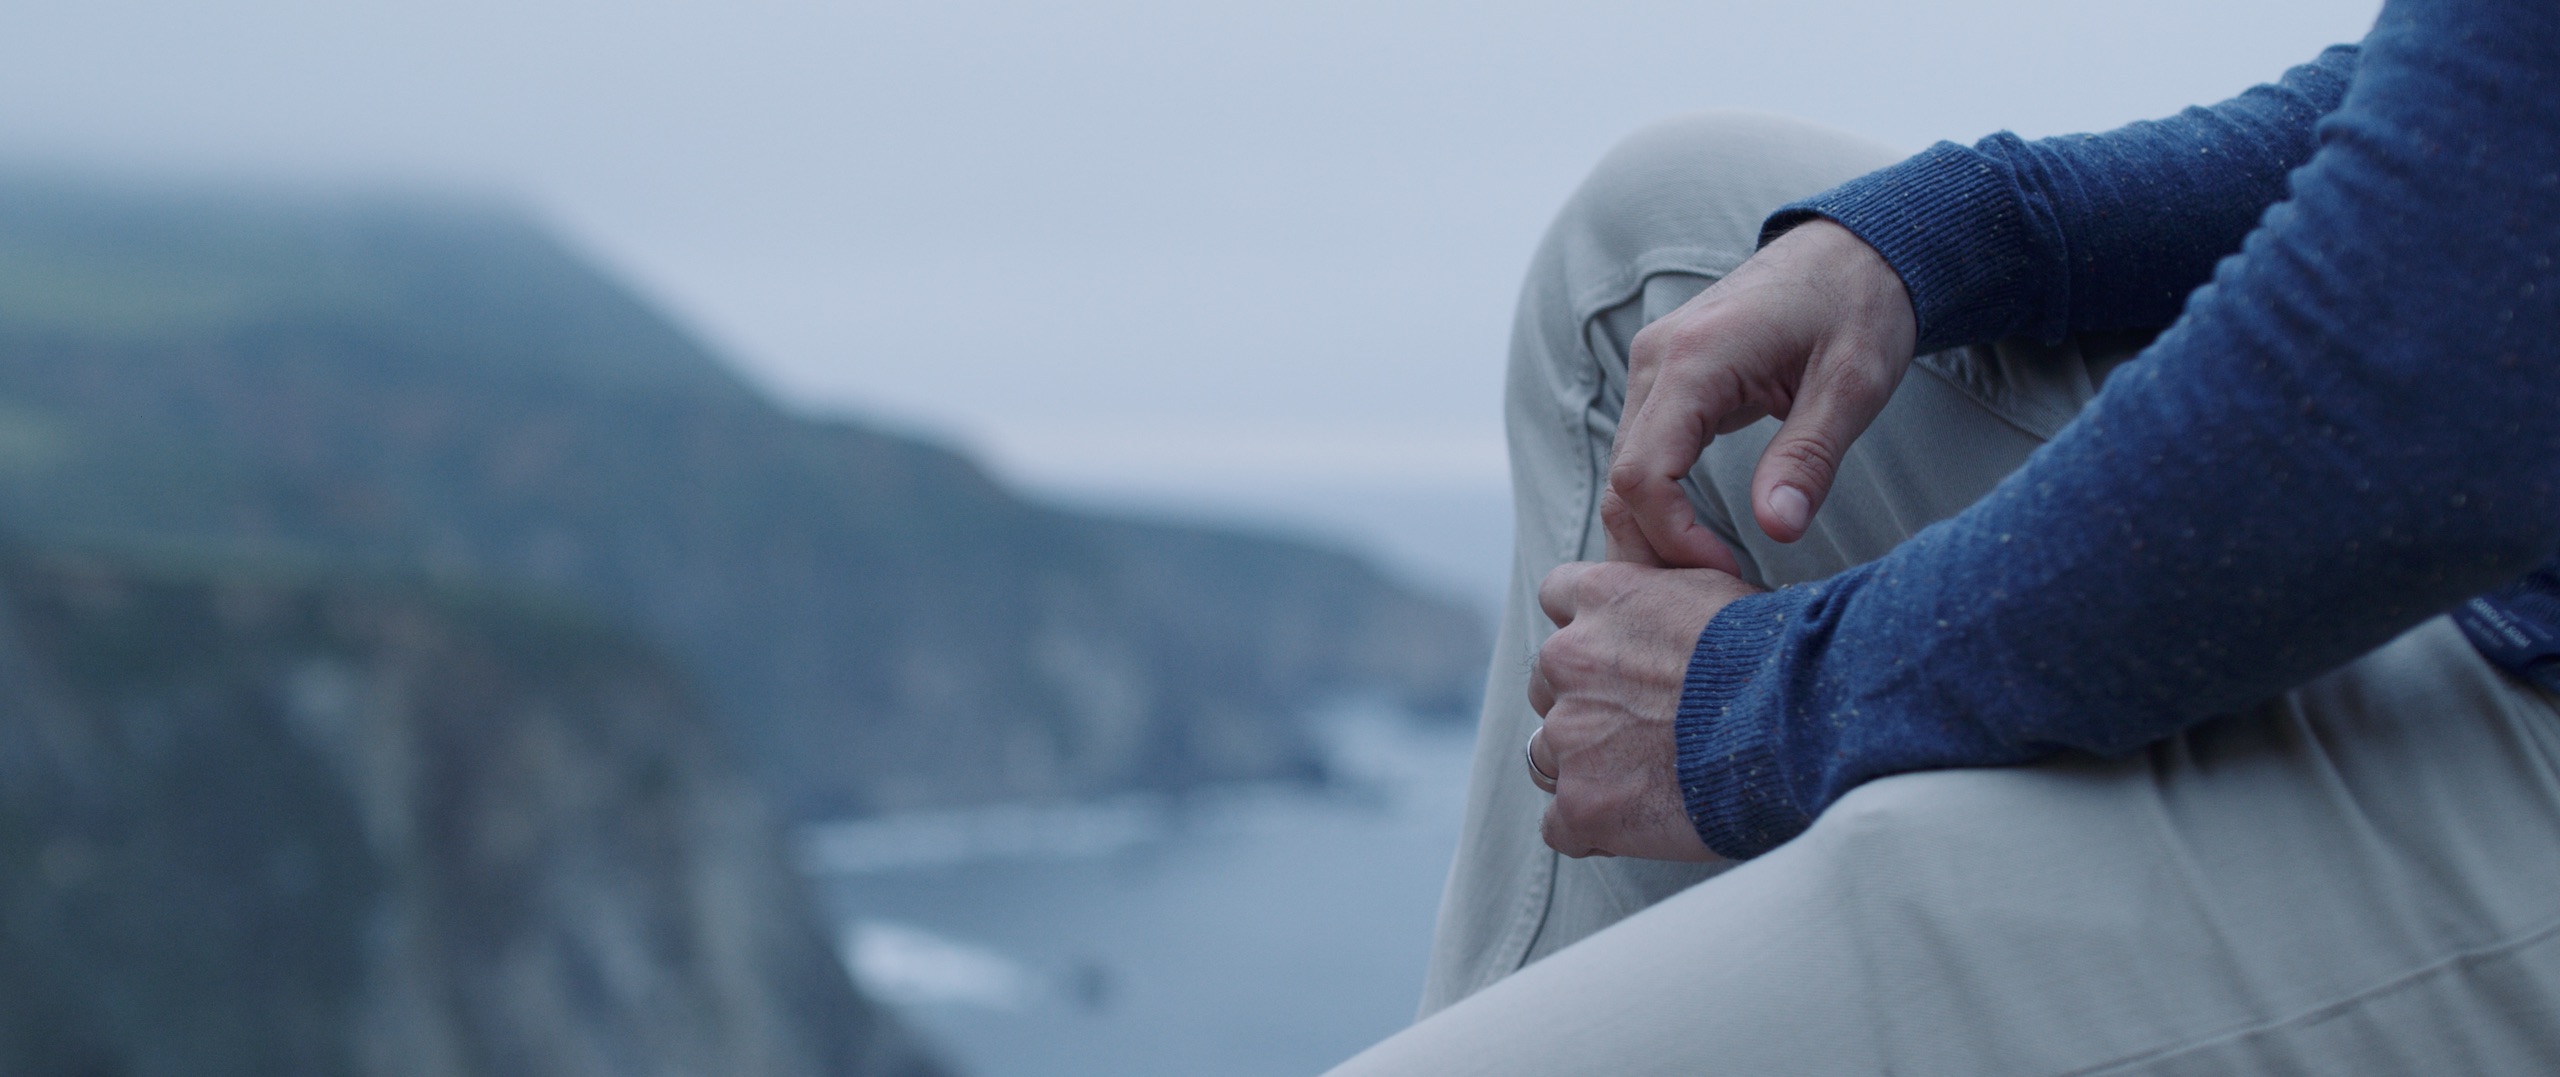 The Dailies Season 2 Episode 3 Komuso Big Sur with closeup of man wearing a blue sweater and gray jeans sitting by cliffs with water down below